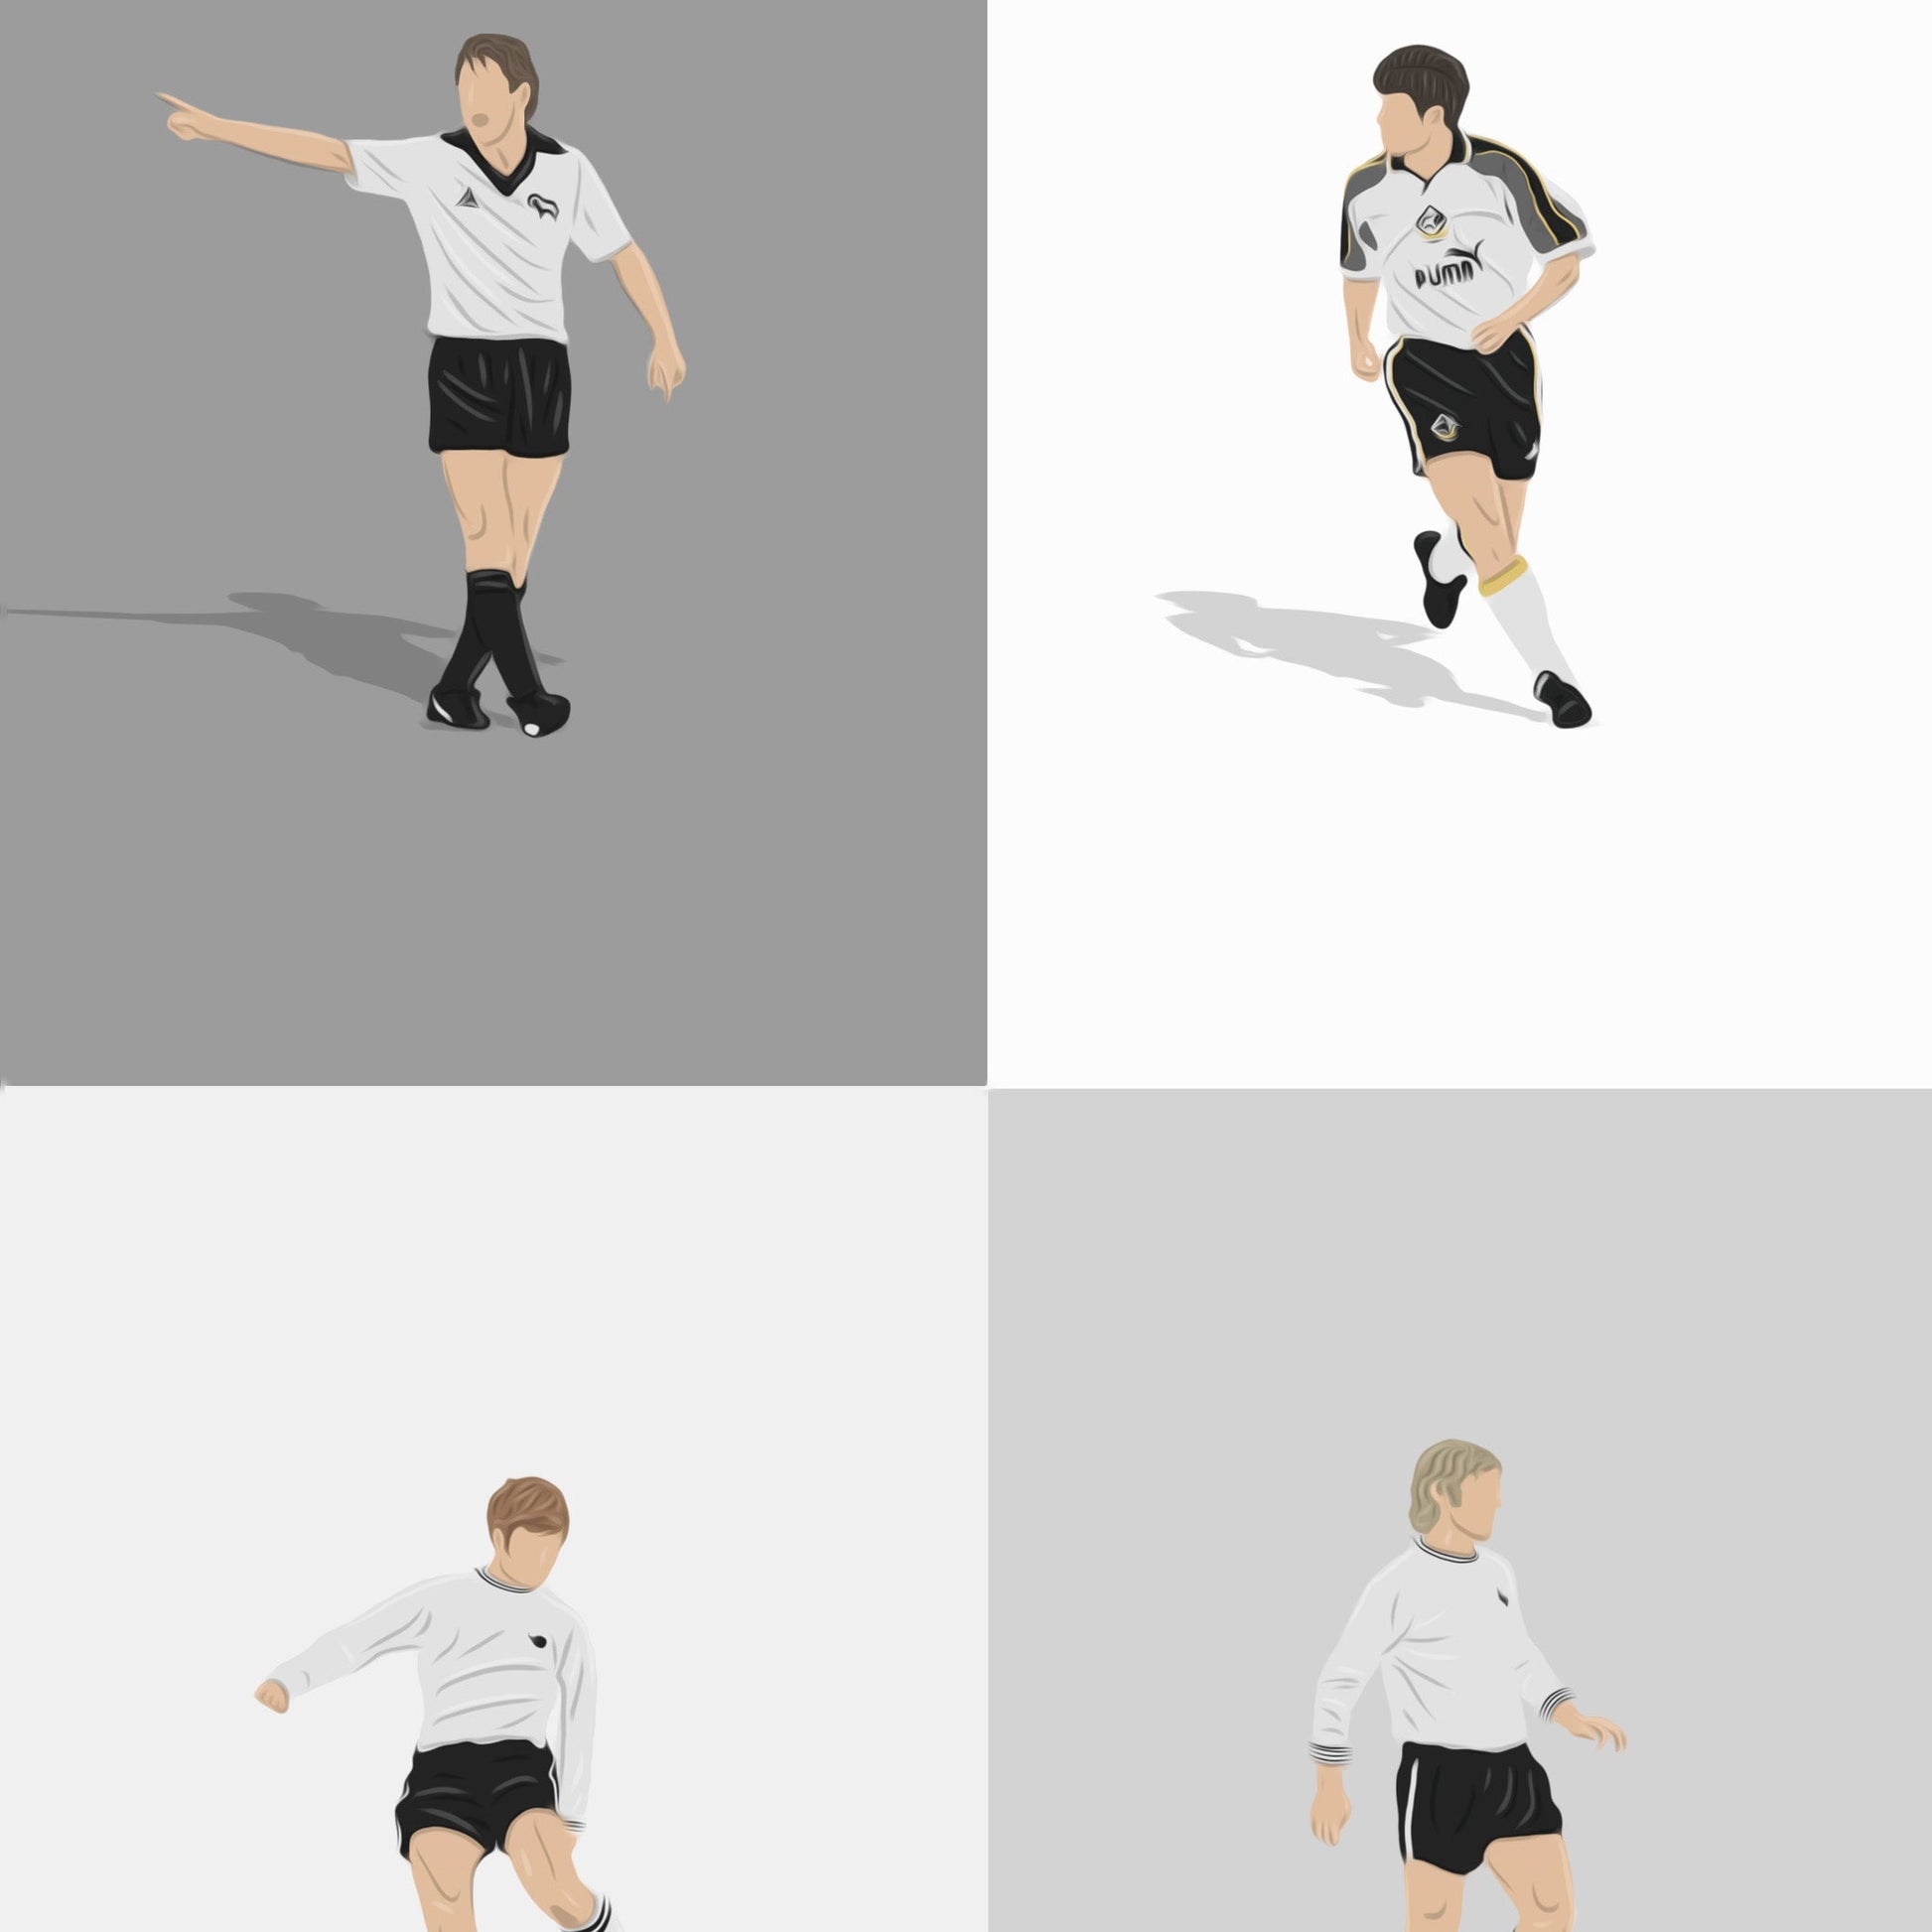 Derby County Legends Print - North Section